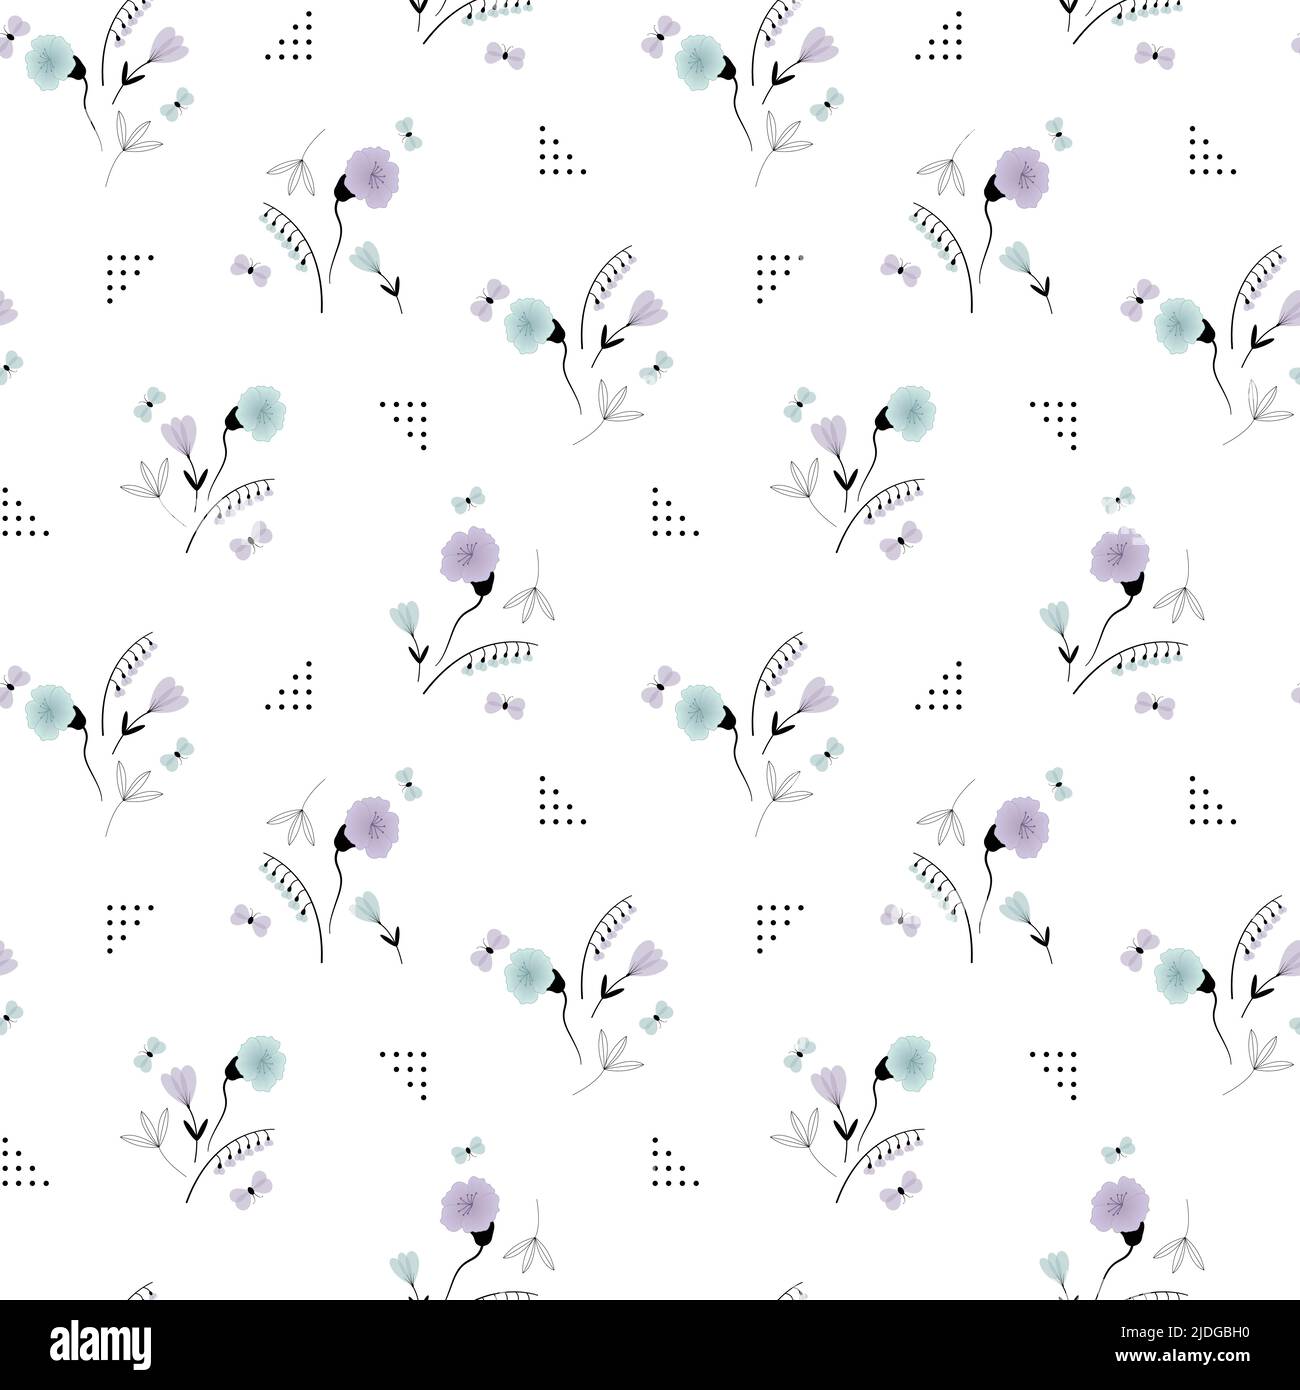 Tiny insects life garden repeat pattern. Vector pattern for fabric backgrounds, textile and paper uses, Best print for kids accessories Stock Vector